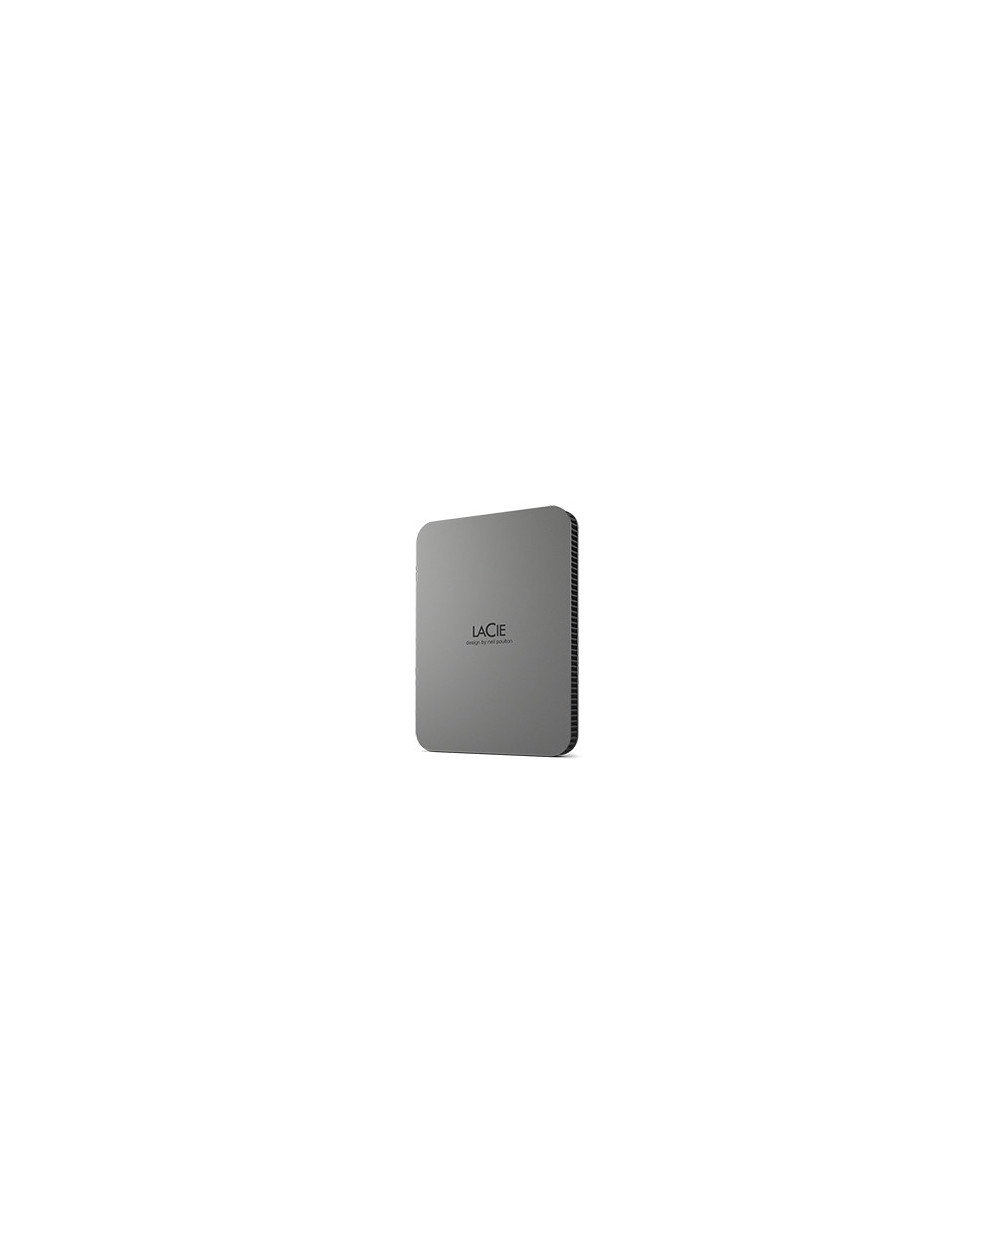 5TB mobile drive secure USB 3.1-C Space gray